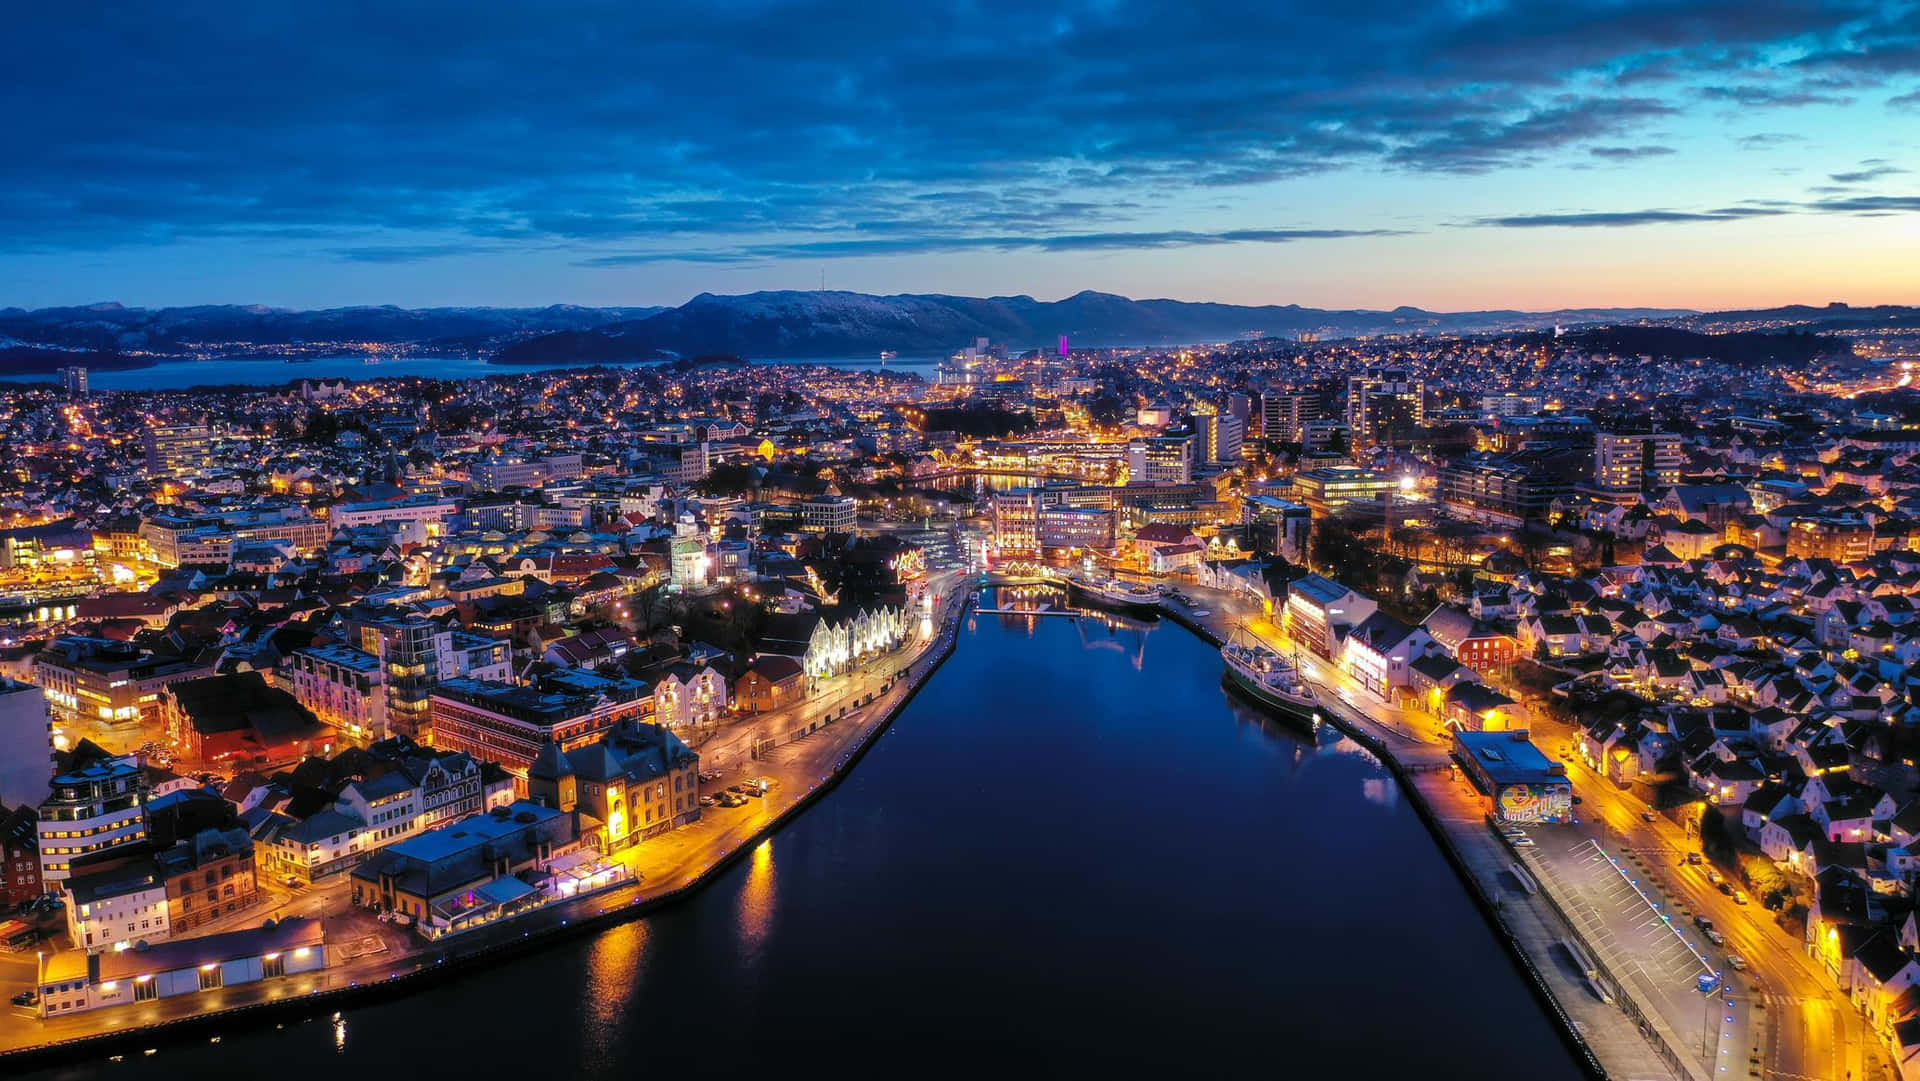 Stavanger Norway Nighttime Cityscape Aerial View Wallpaper